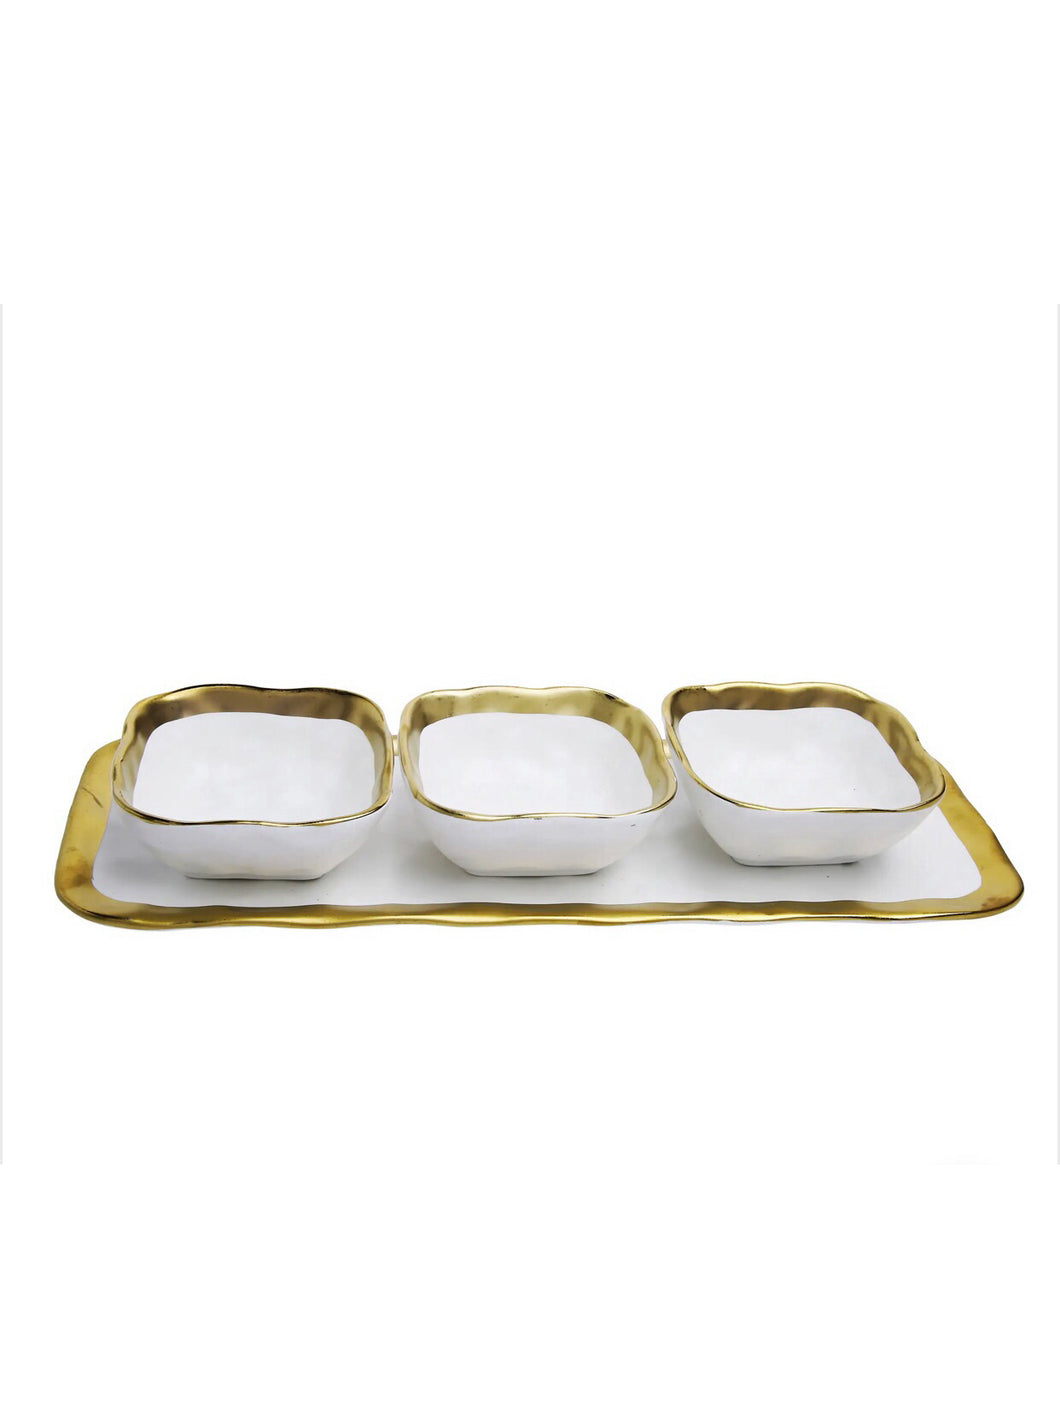 Relish Dish with 3 Square Bowls and Tray with Gold Trim